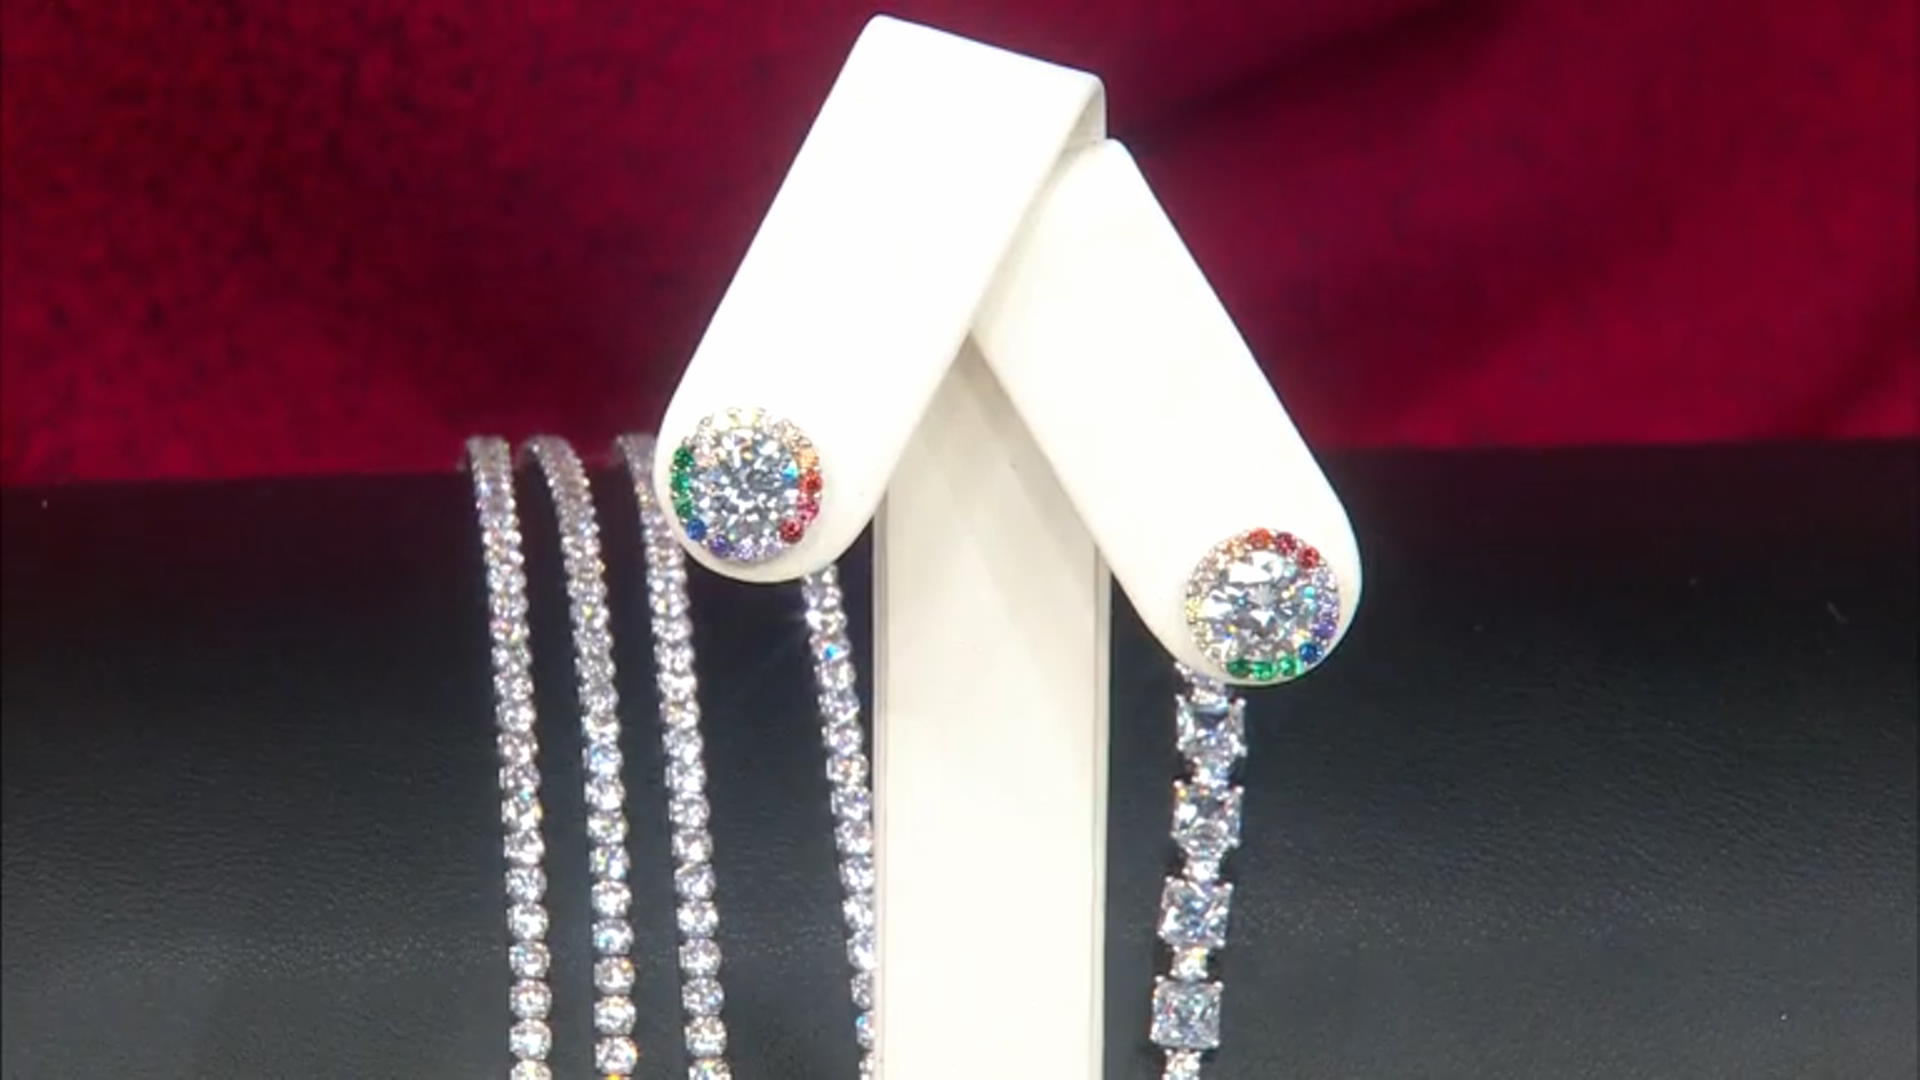 Red/Blue/Green Nanocrystal & Multicolor Cubic Zirconia Rhodium Over Silver Earrings Video Thumbnail